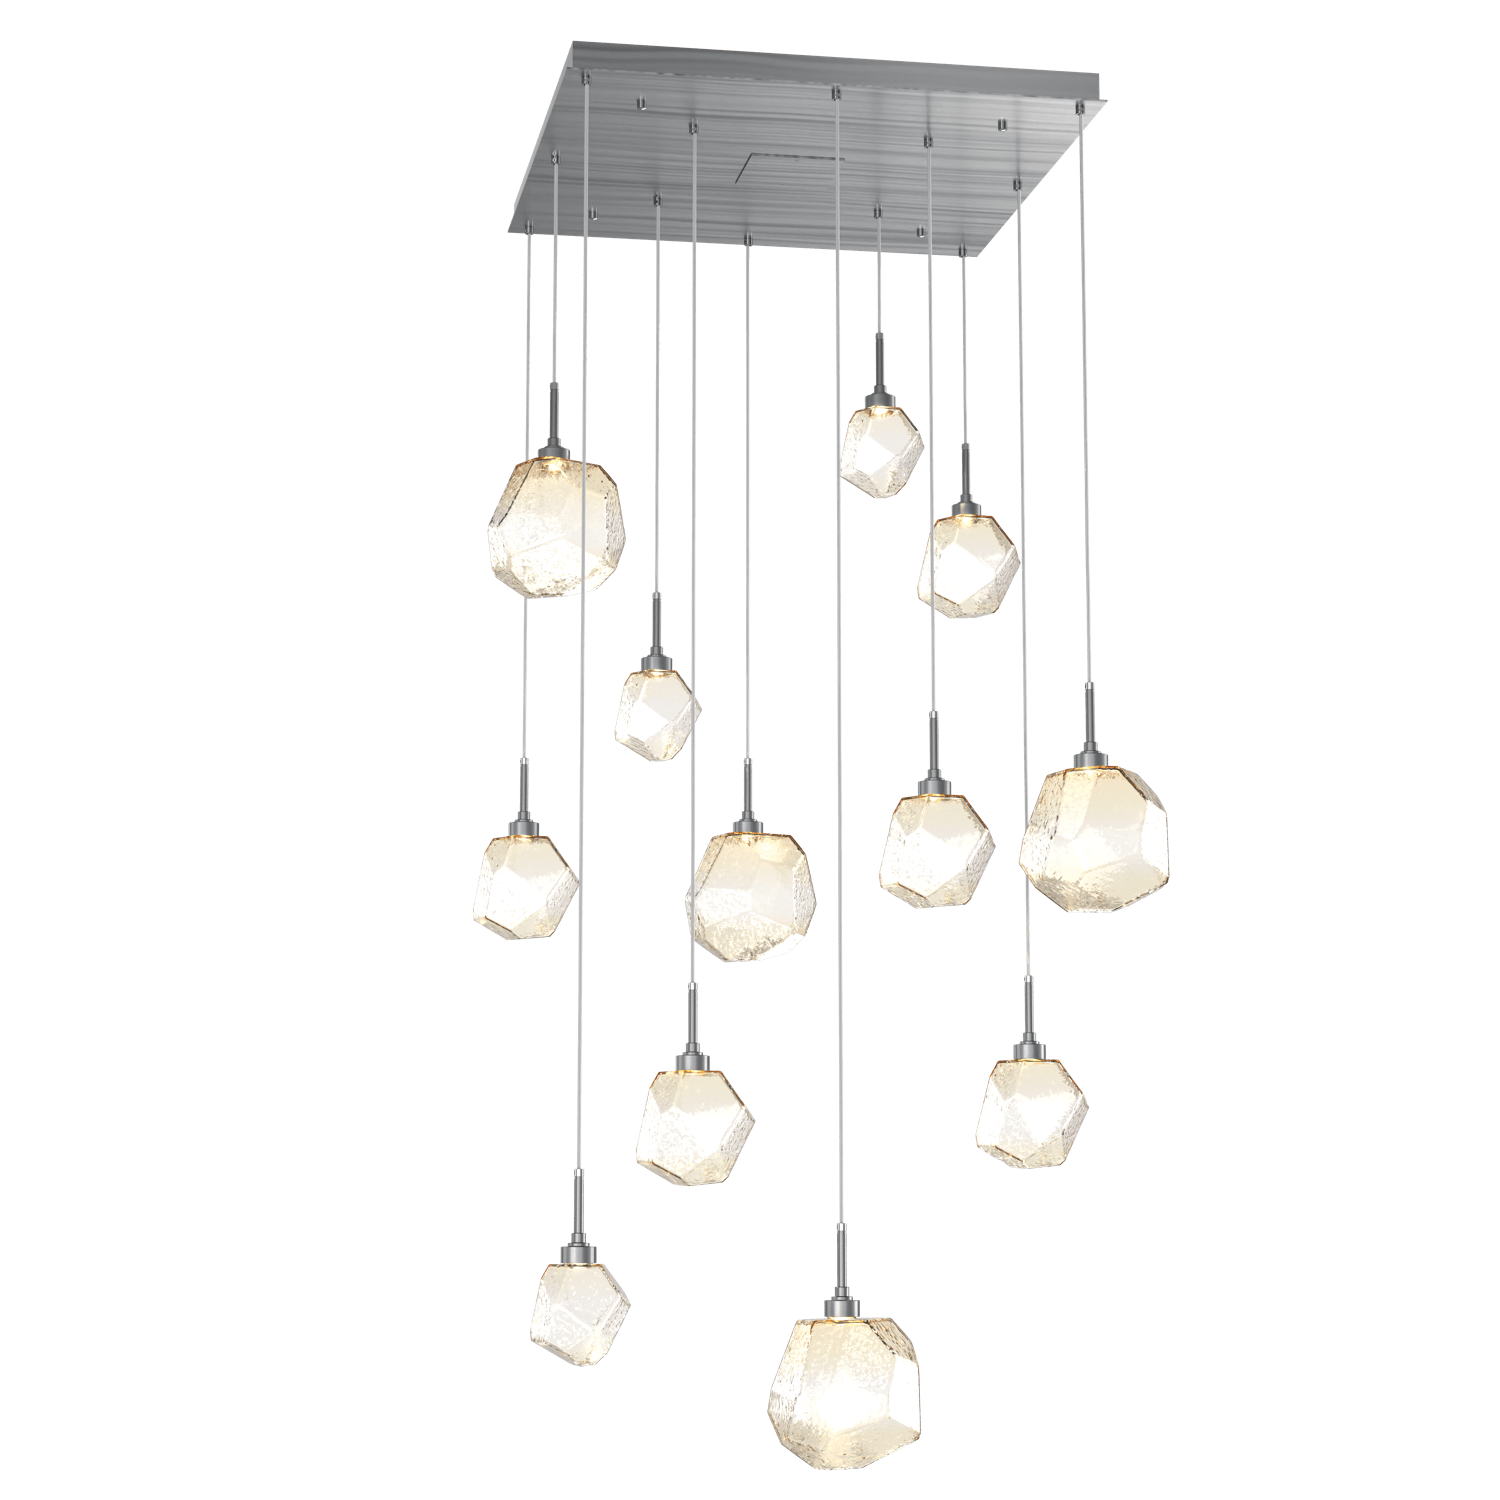 CHB0039-12-GM-A-Hammerton-Studio-Gem-12-light-square-pendant-chandelier-with-gunmetal-finish-and-amber-blown-glass-shades-and-LED-lamping